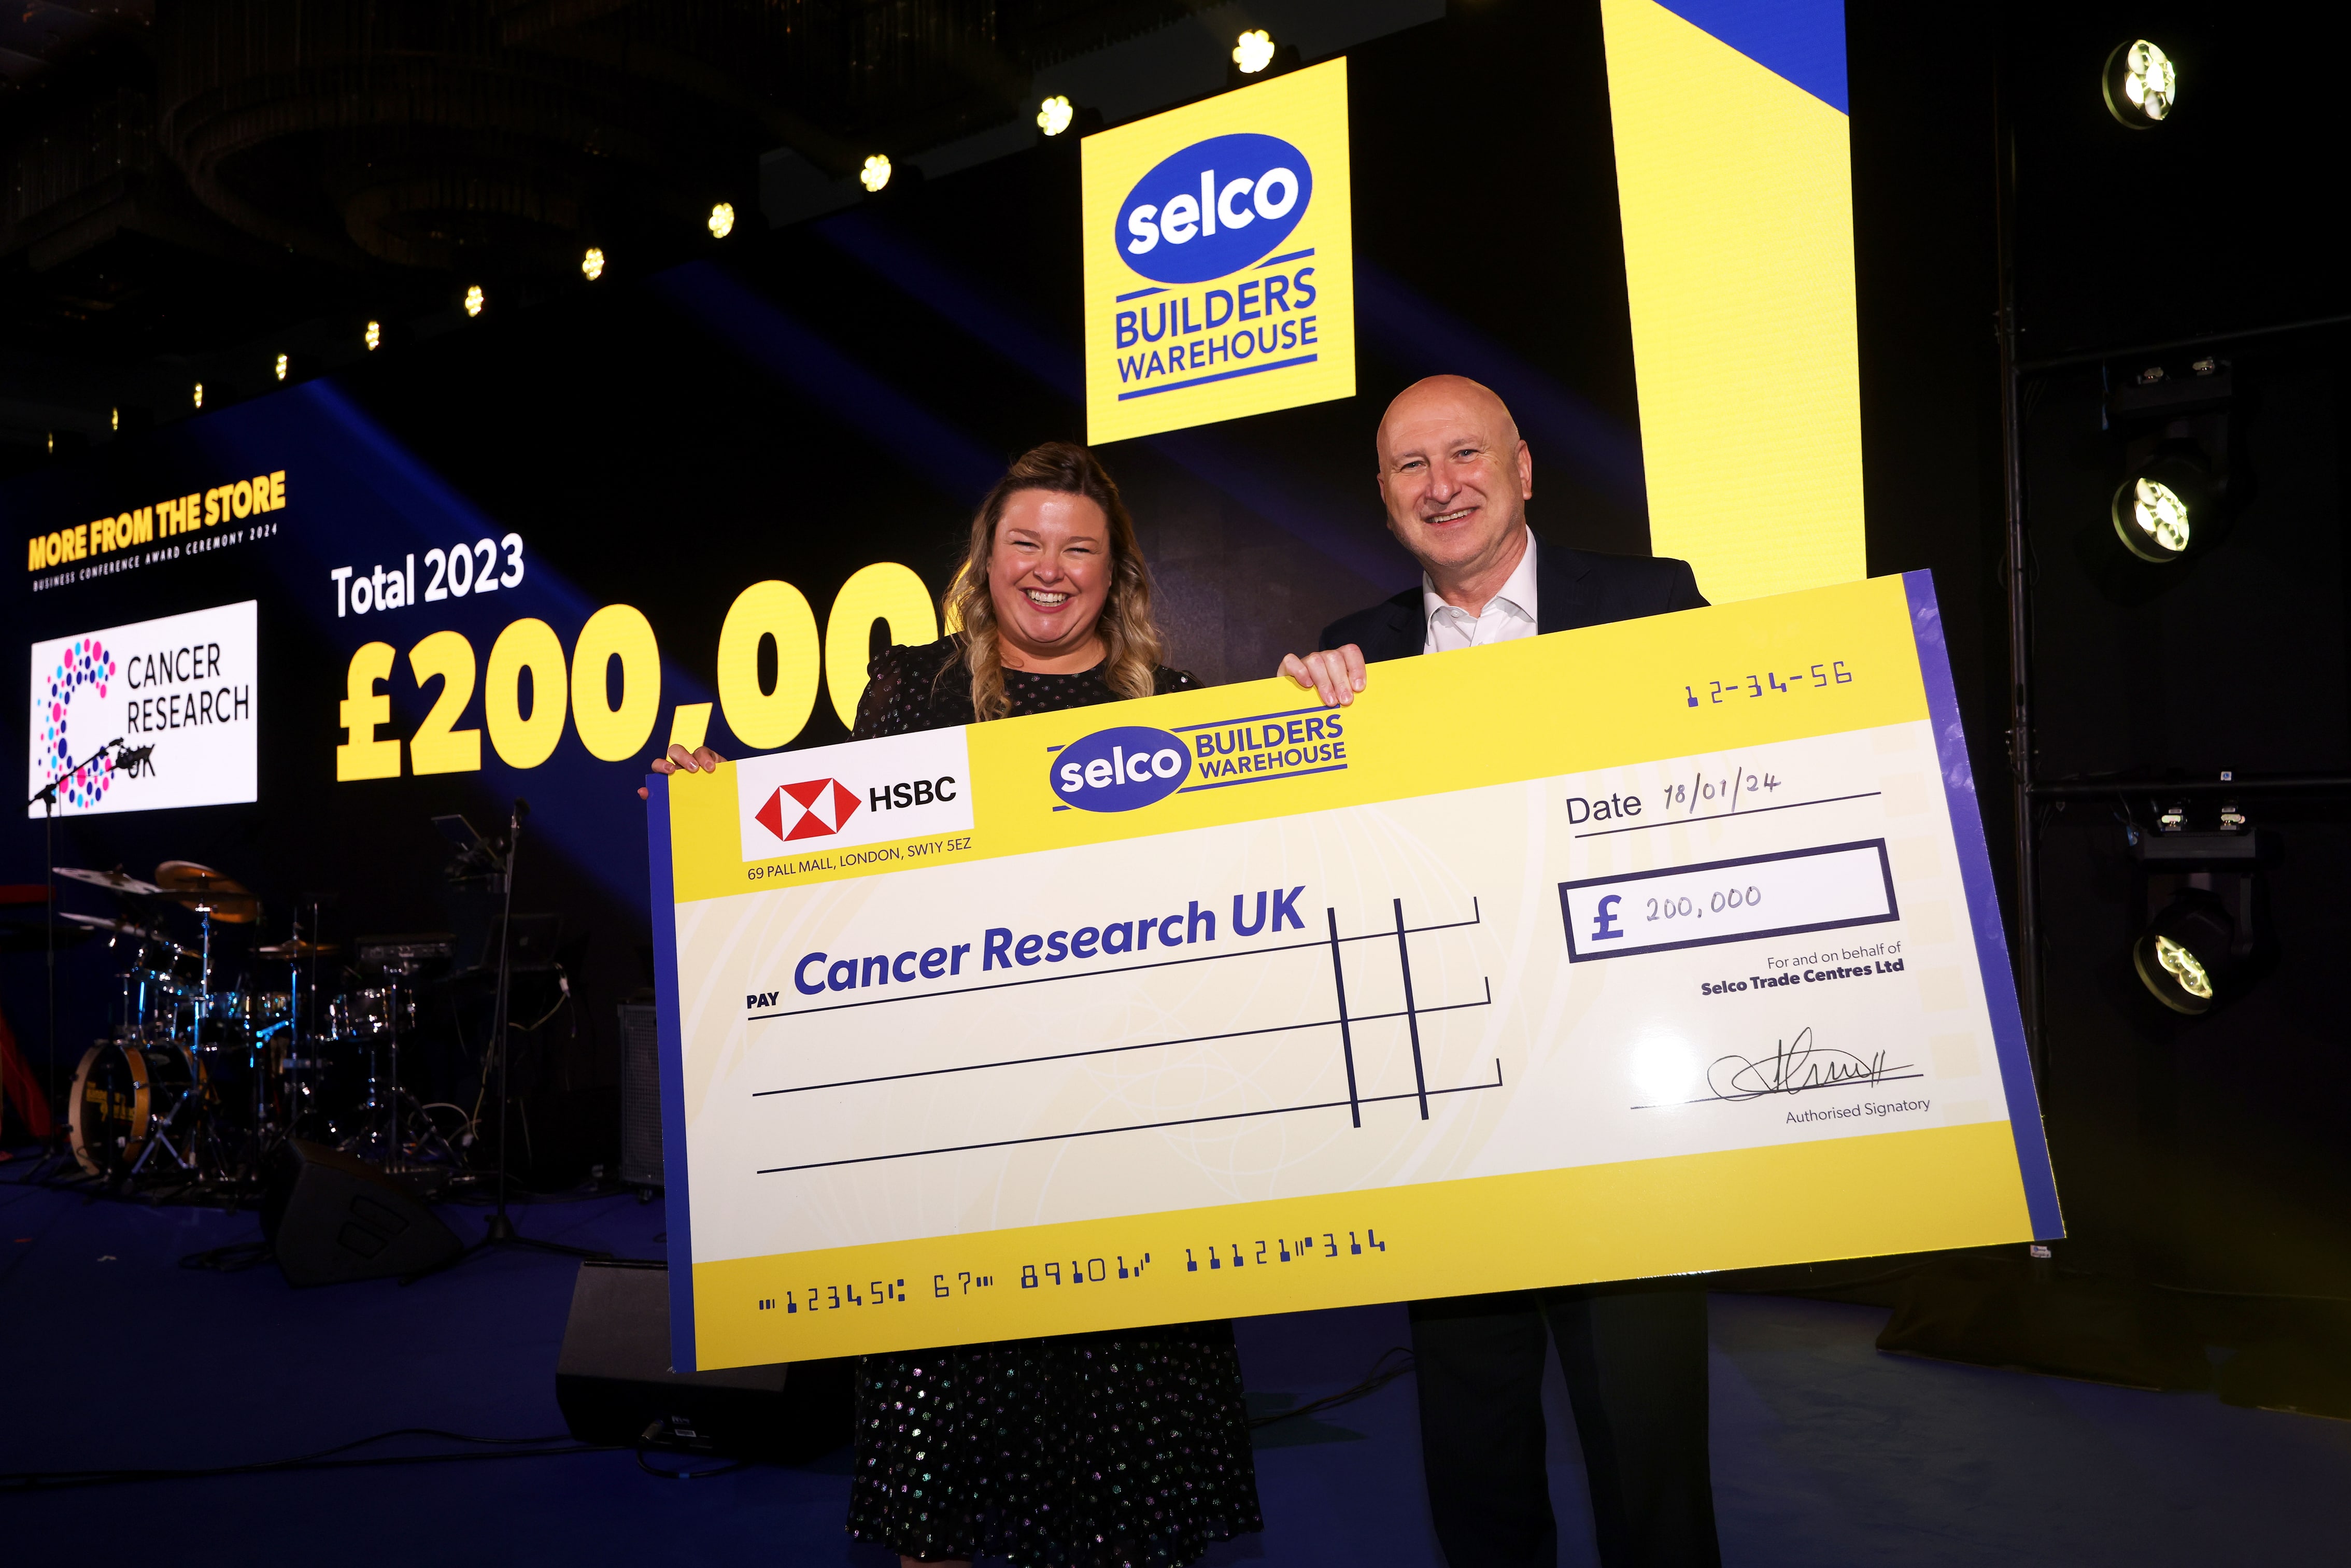 Selco Charity partner cancer research UK